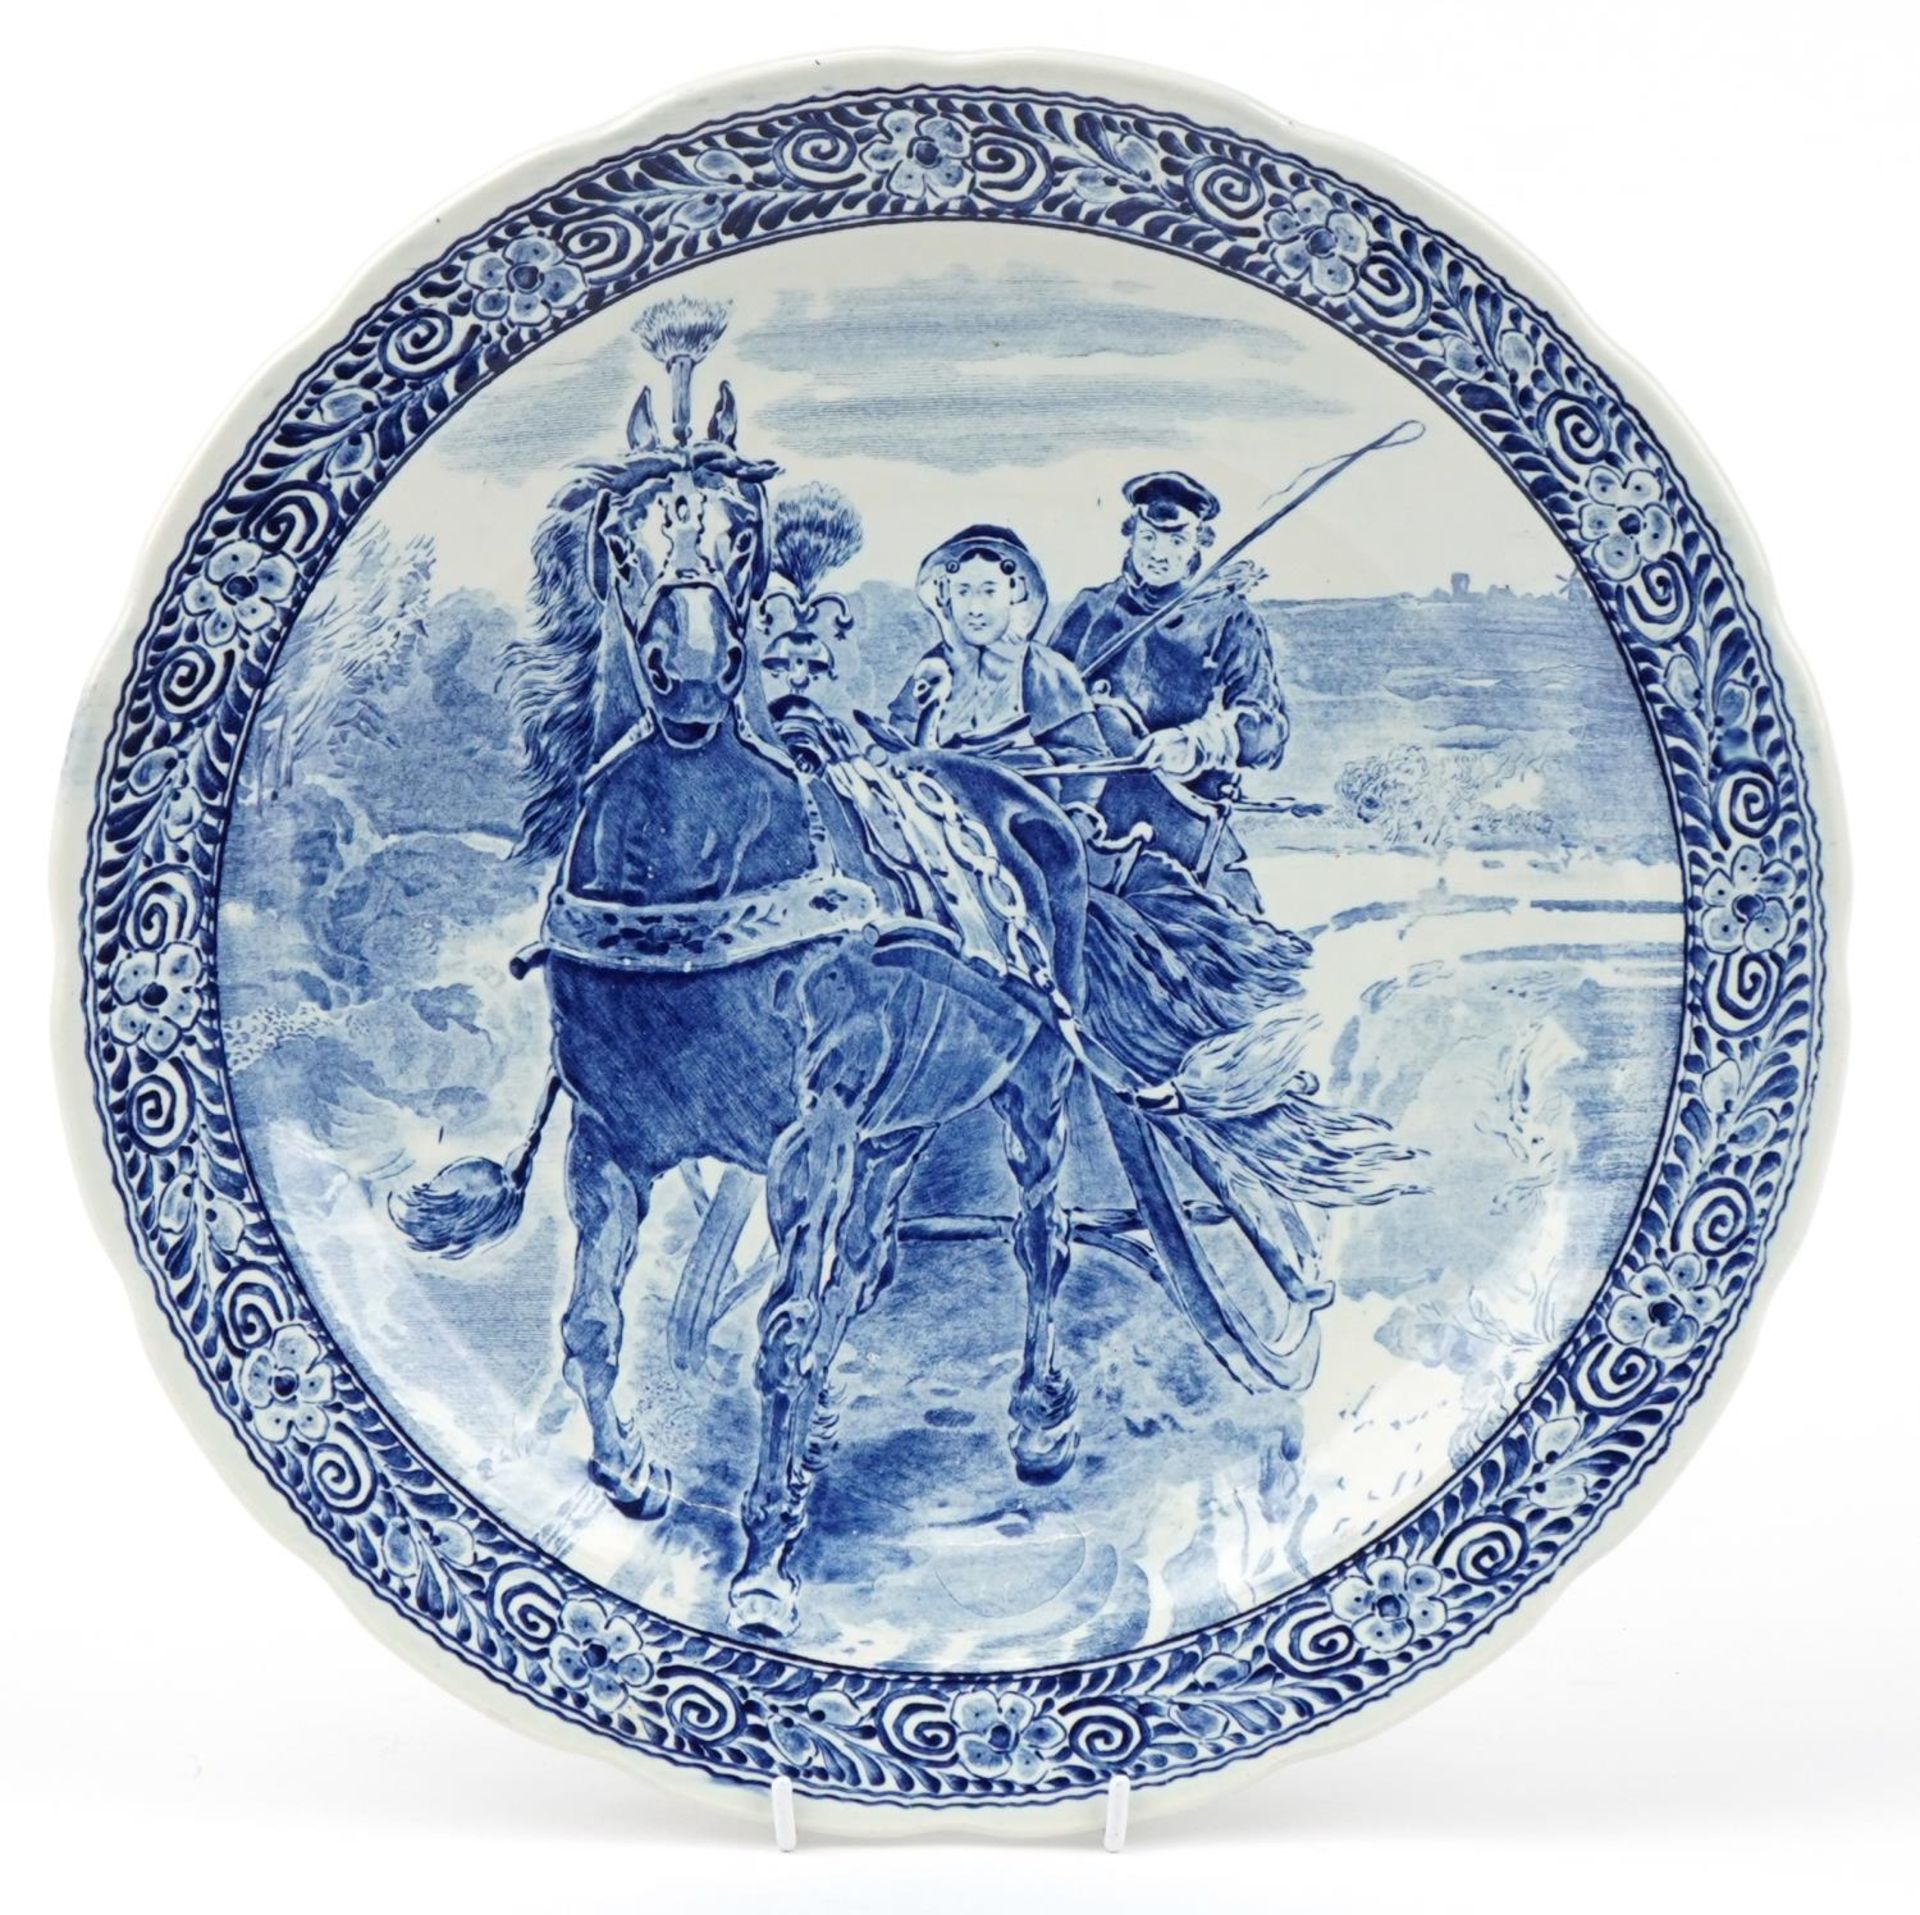 Boch, large Dutch Delft blue and white charger decorated with figures in a horse drawn cart, 39.